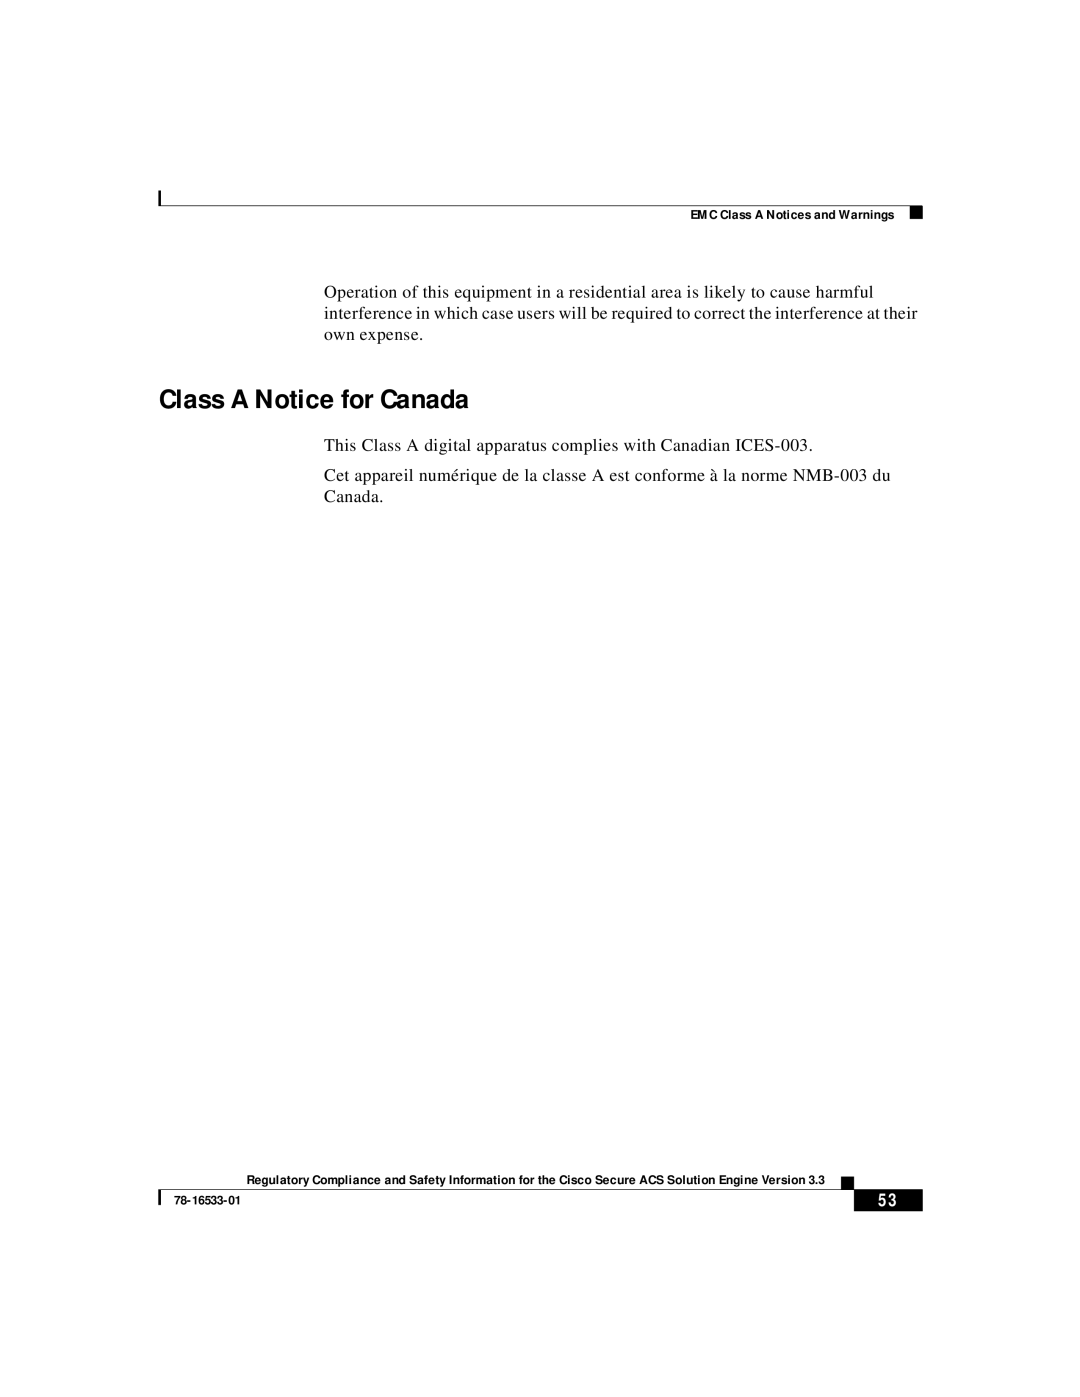 Cisco Systems CSACSE-1112-K9 manual Class A Notice for Canada 